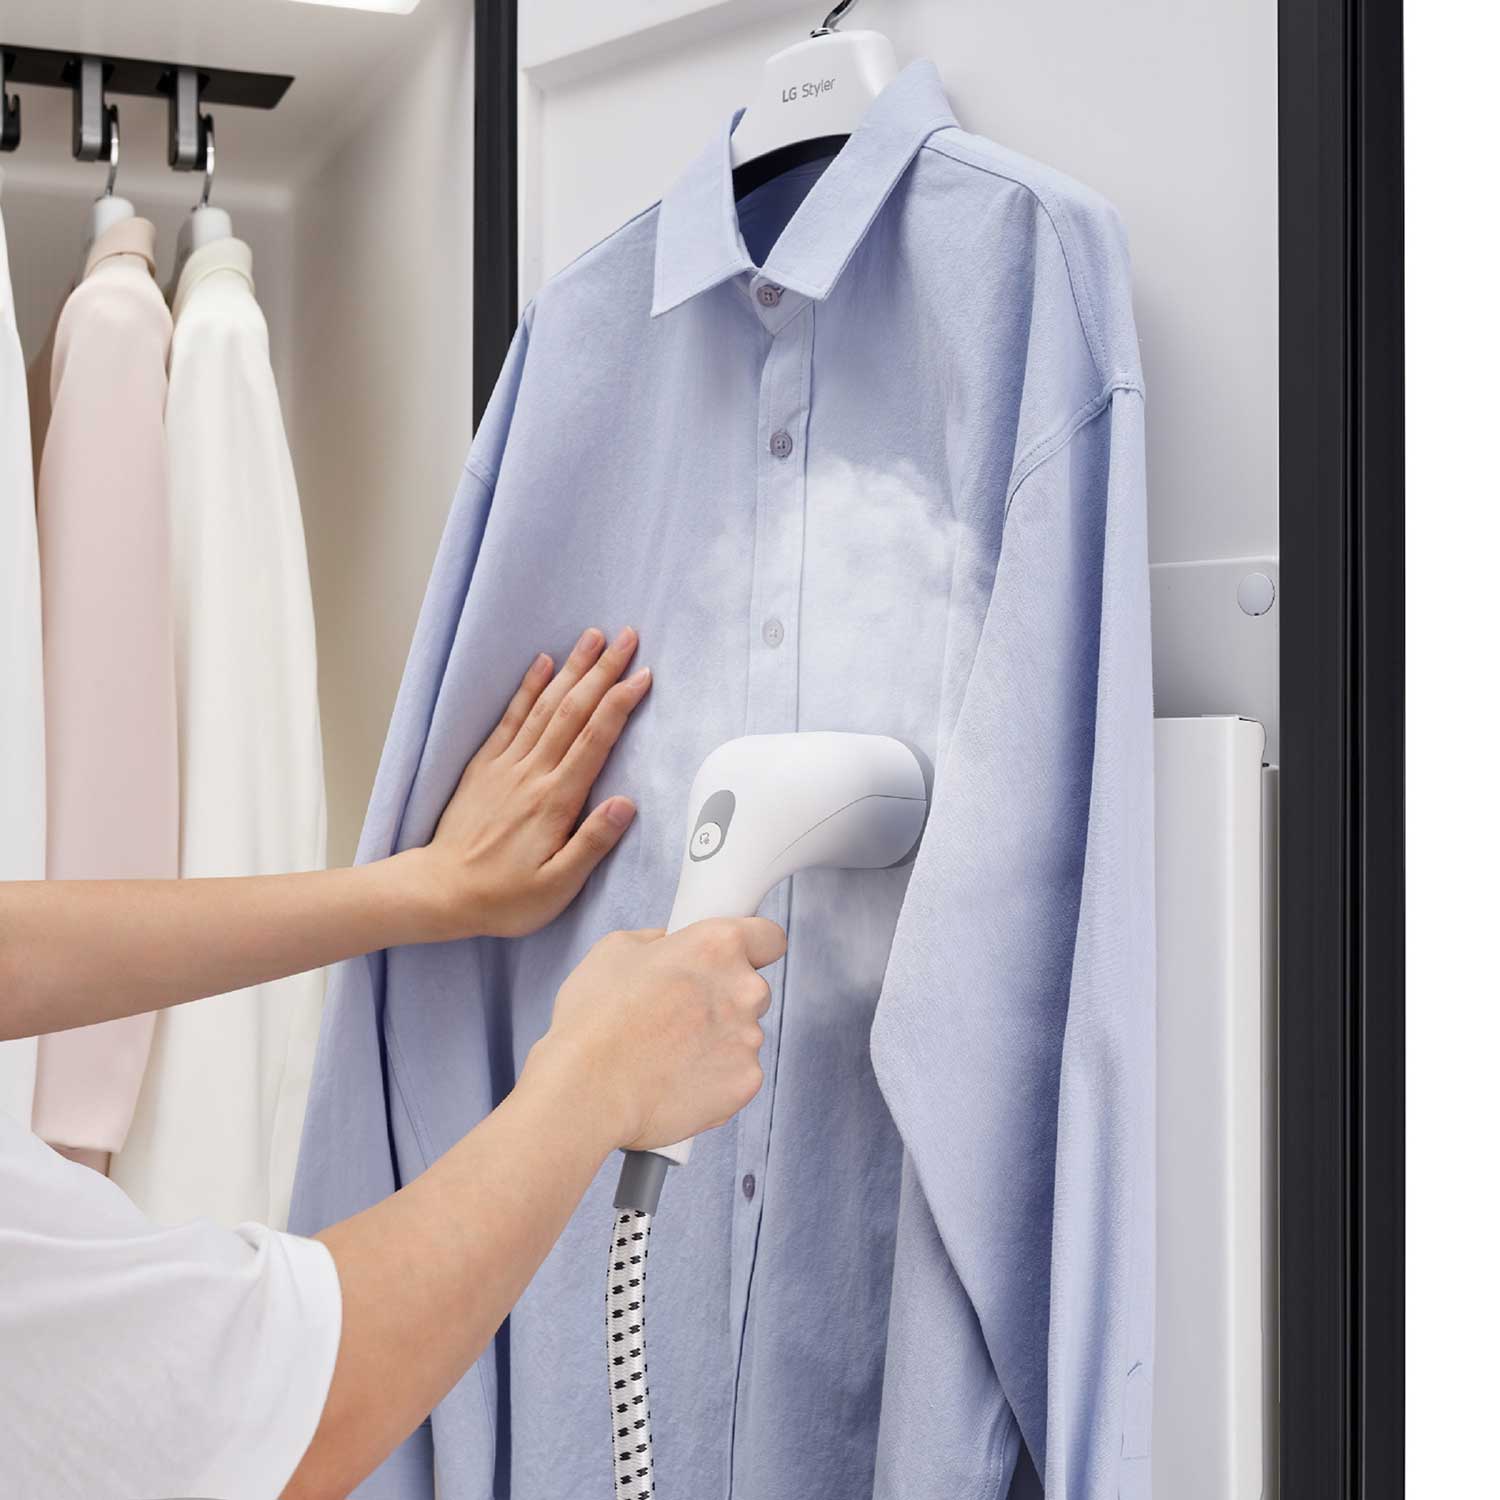 LG Styler clothing care solution